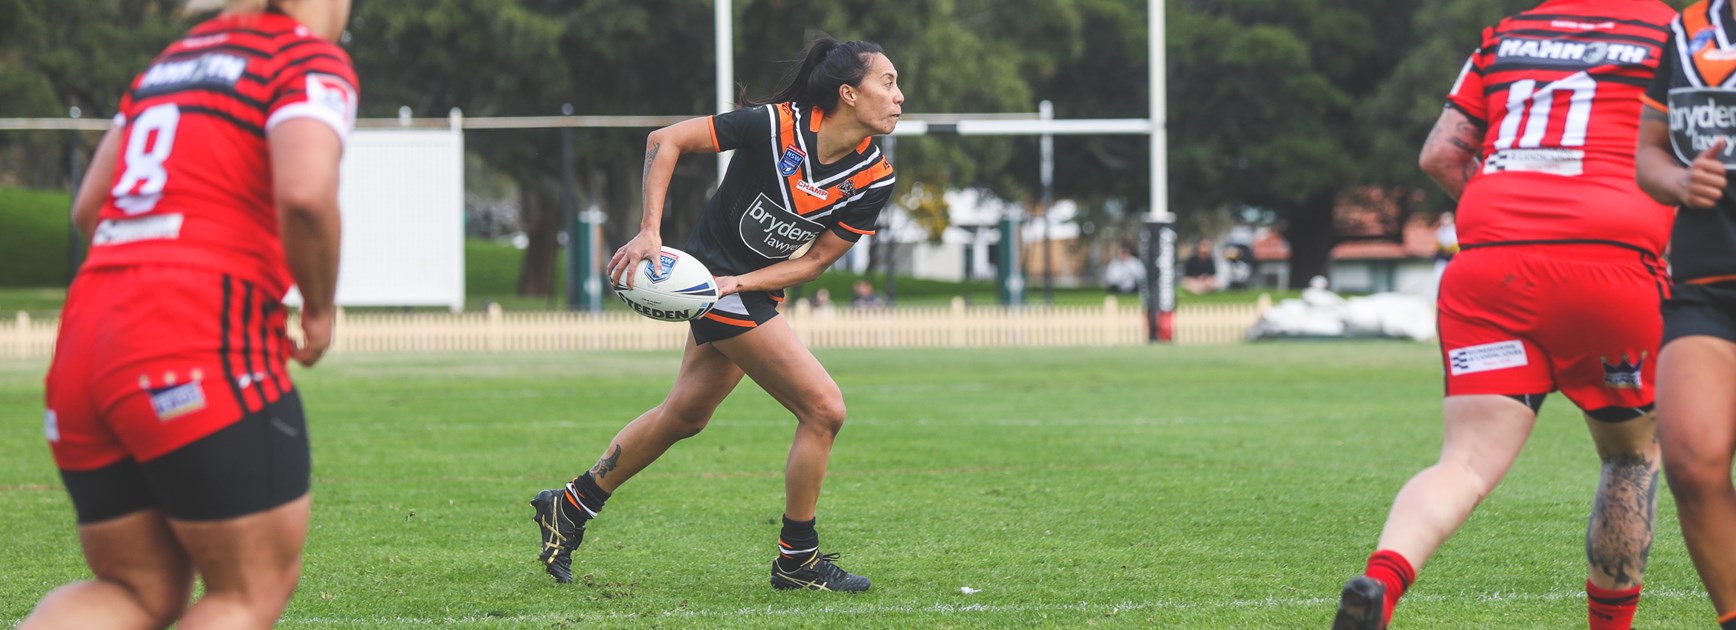 Wests Tigers women on mission to lift against Bulldogs